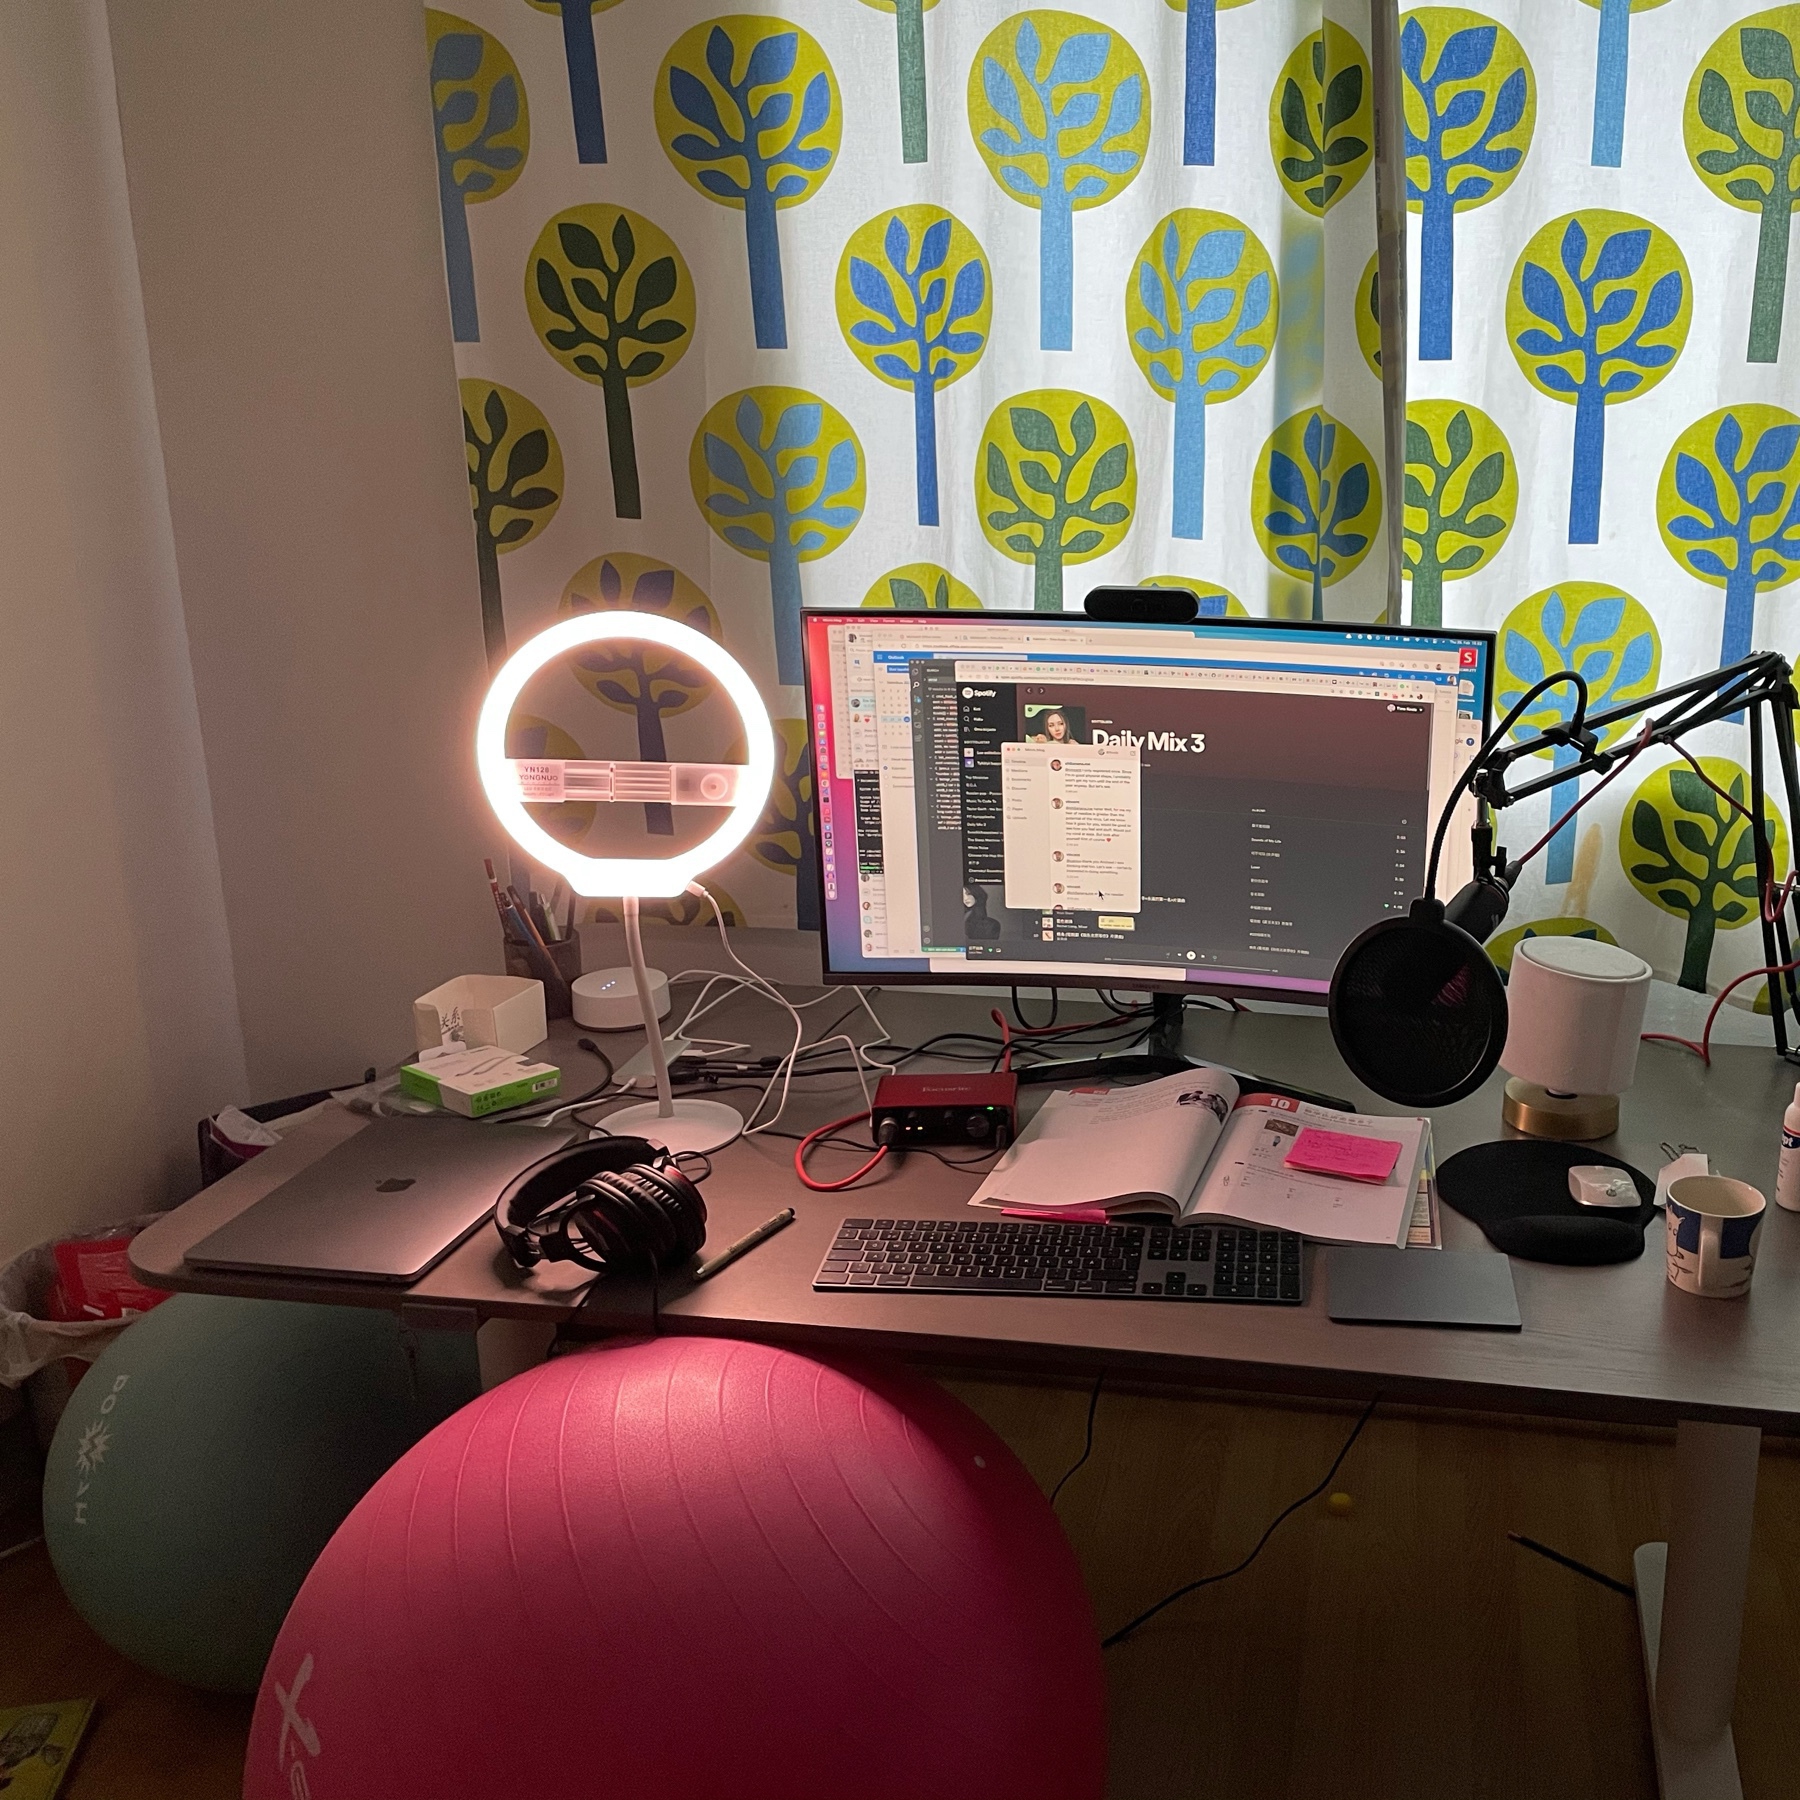 pink ball as a seat, computer desk, assorted computing stuff, microphone and a textbook